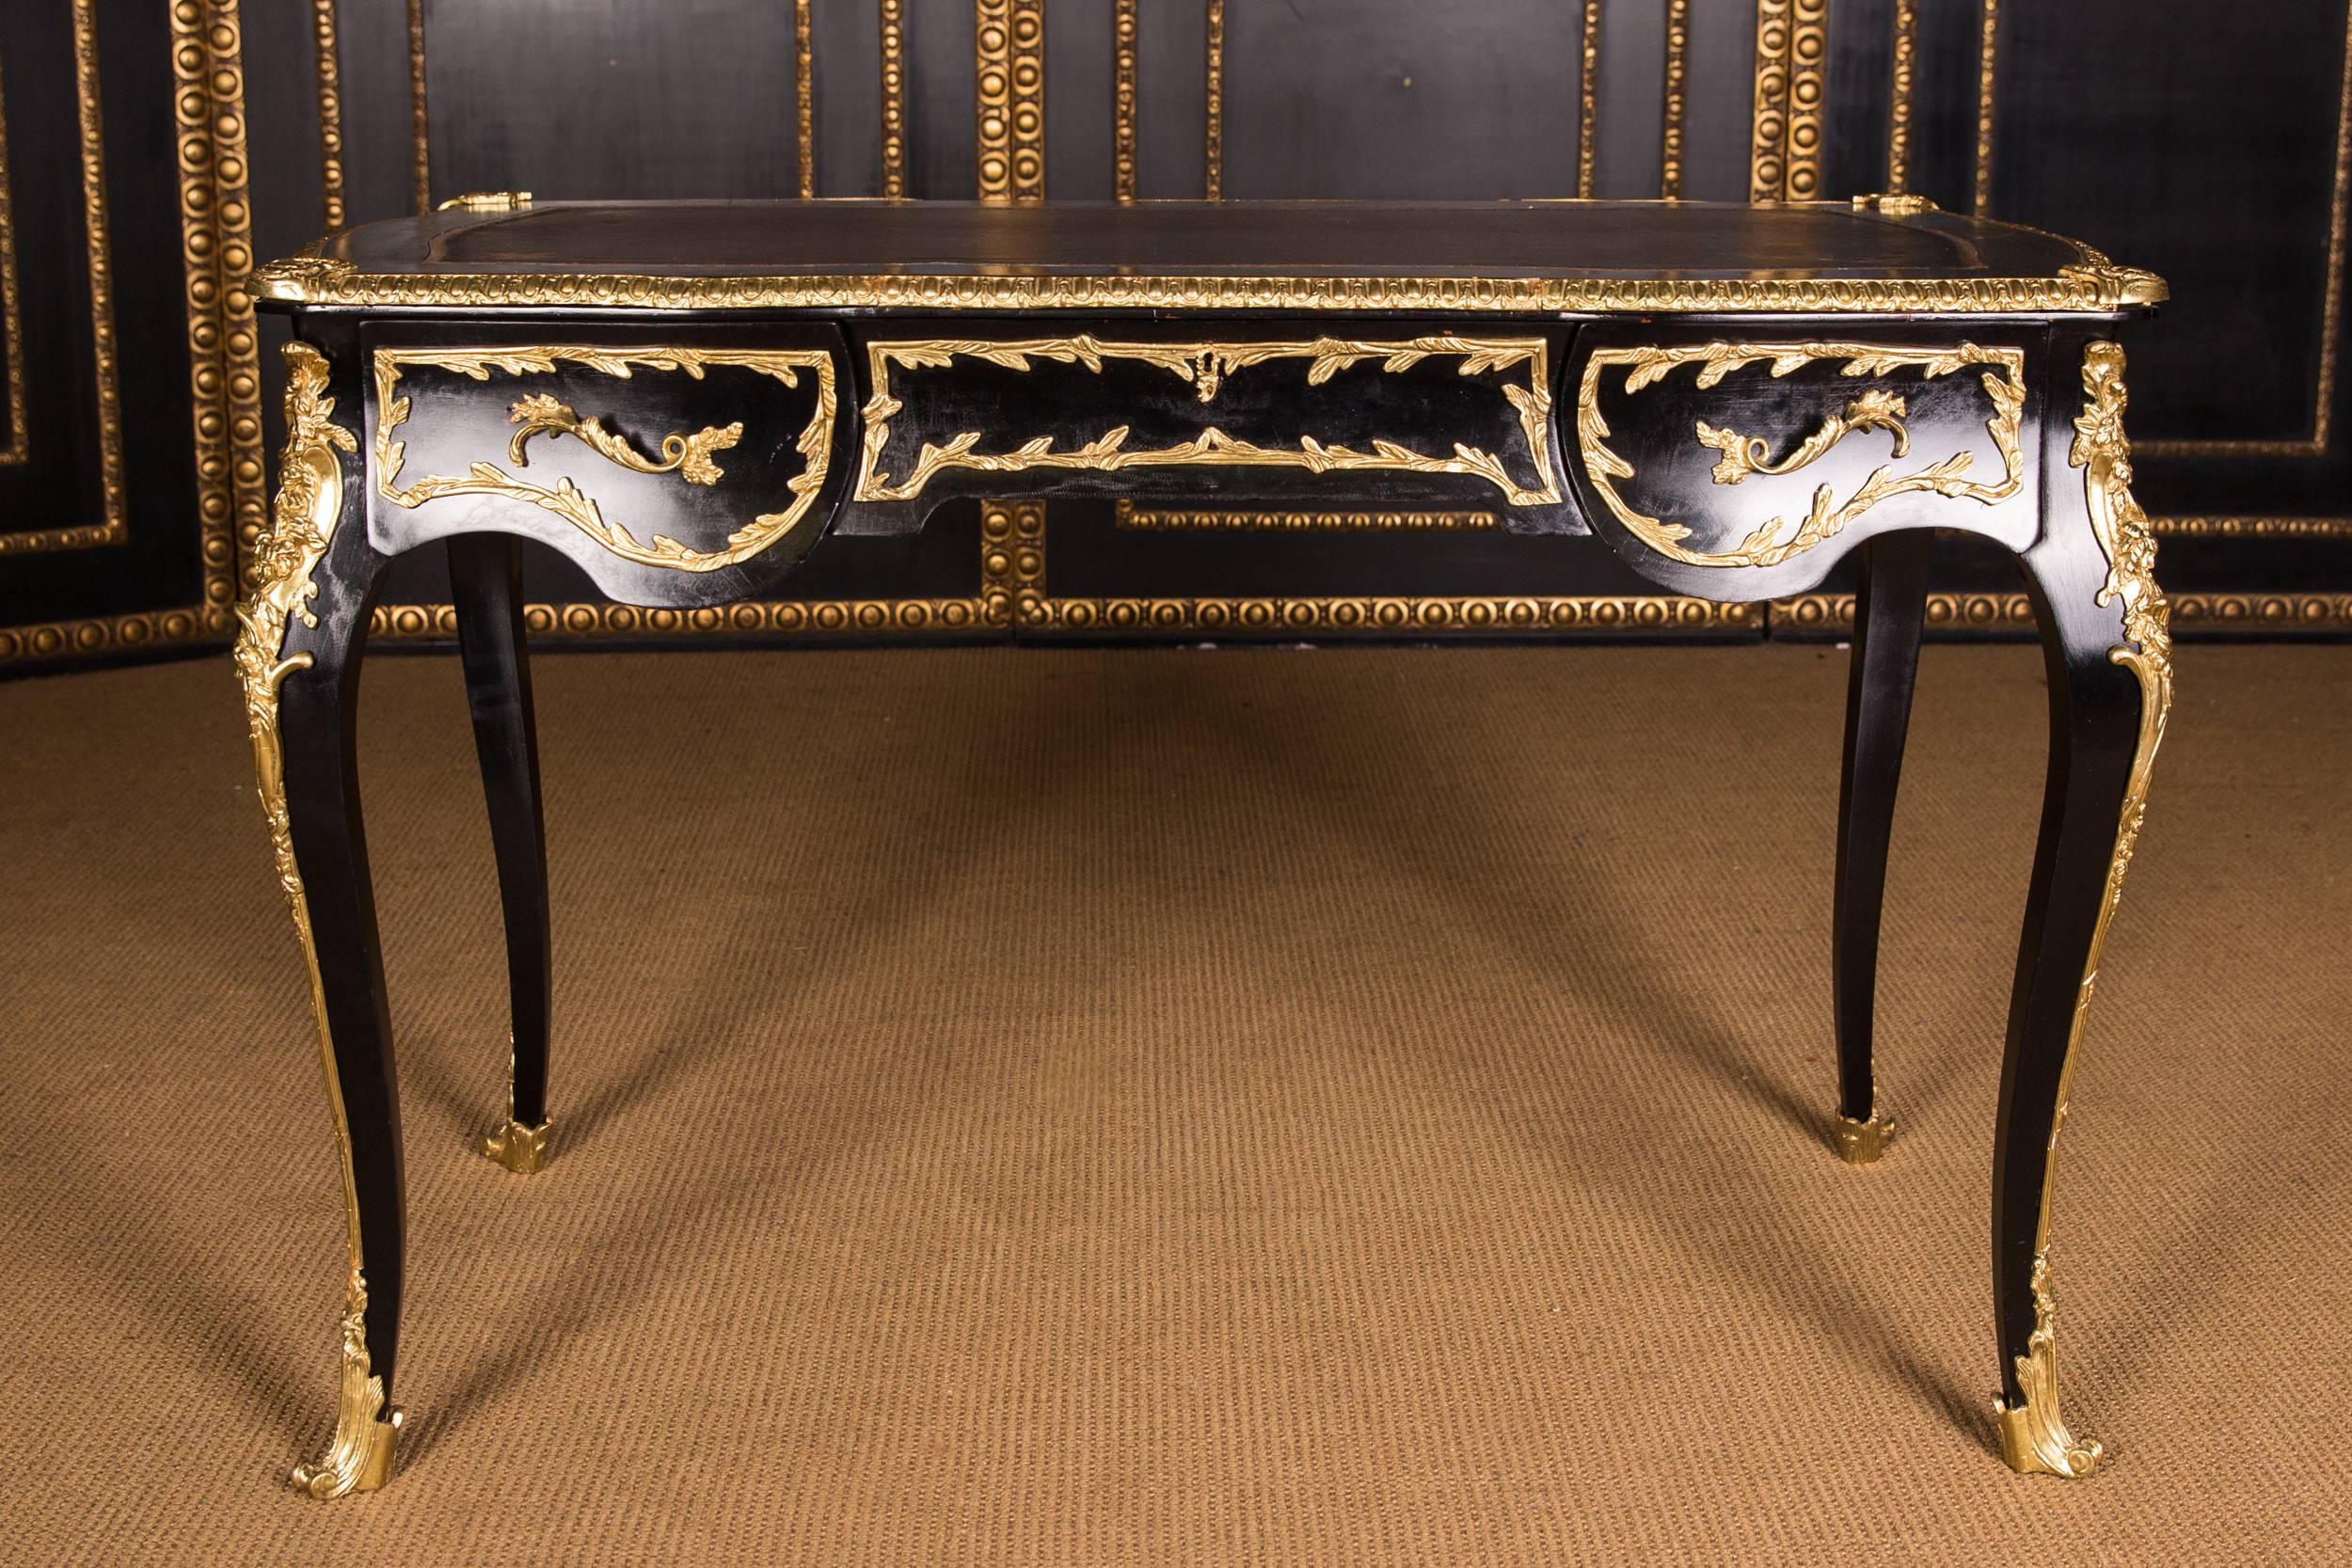 Black ebonized, four-sided passively curved frame base on high, elegantly curved squares. Encased in finely chiseled brass fittings. Slightly protruding tabletop with profiled decorated bronze lining and gold-imprinted leather imitation insert(the